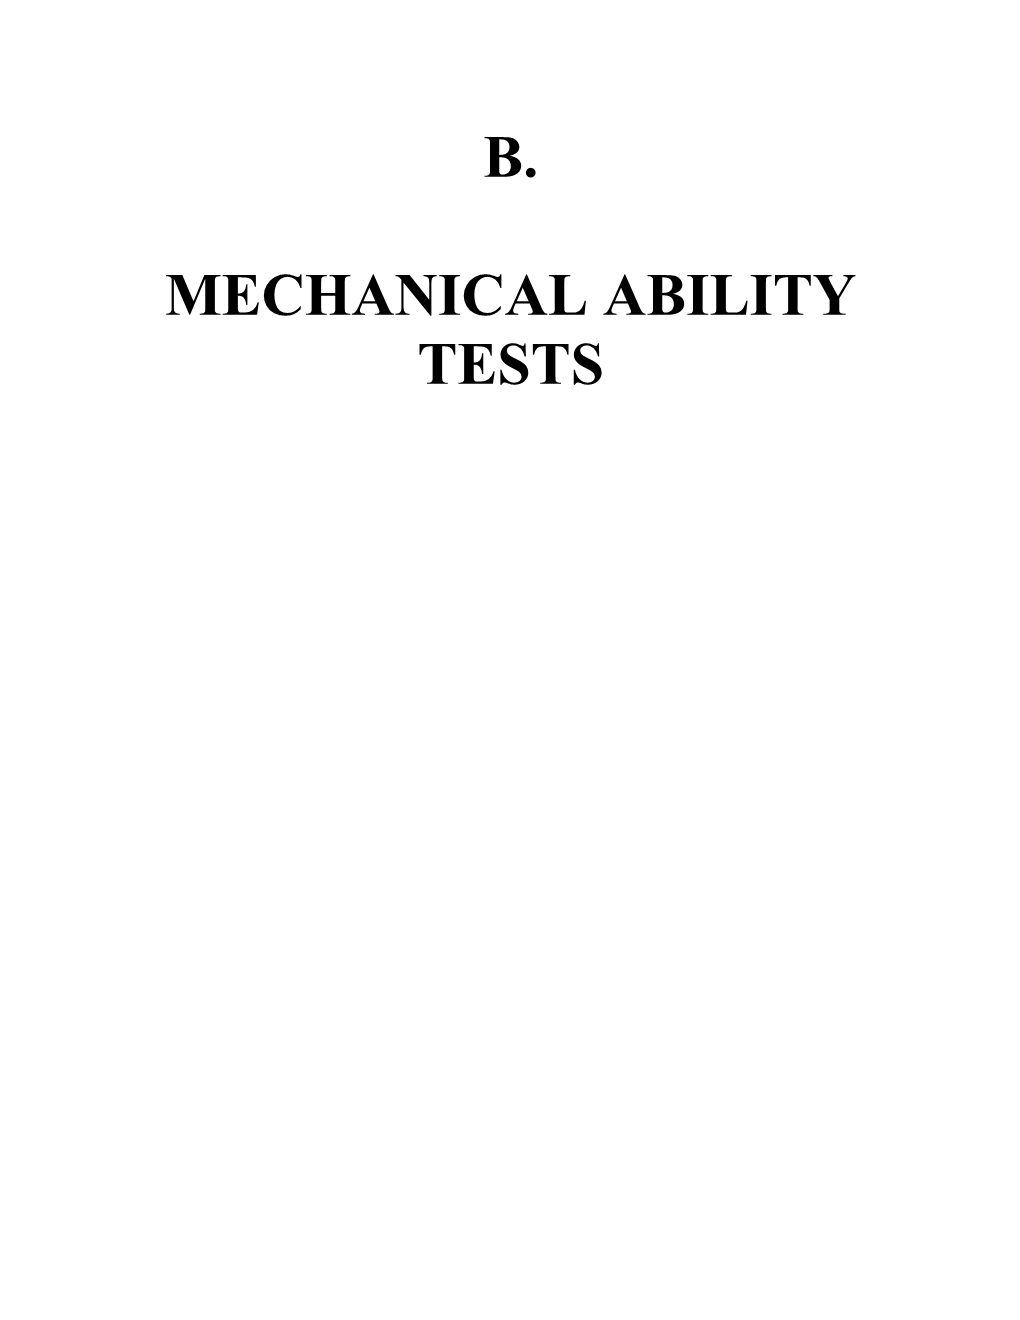 Mechanical Ability Tests